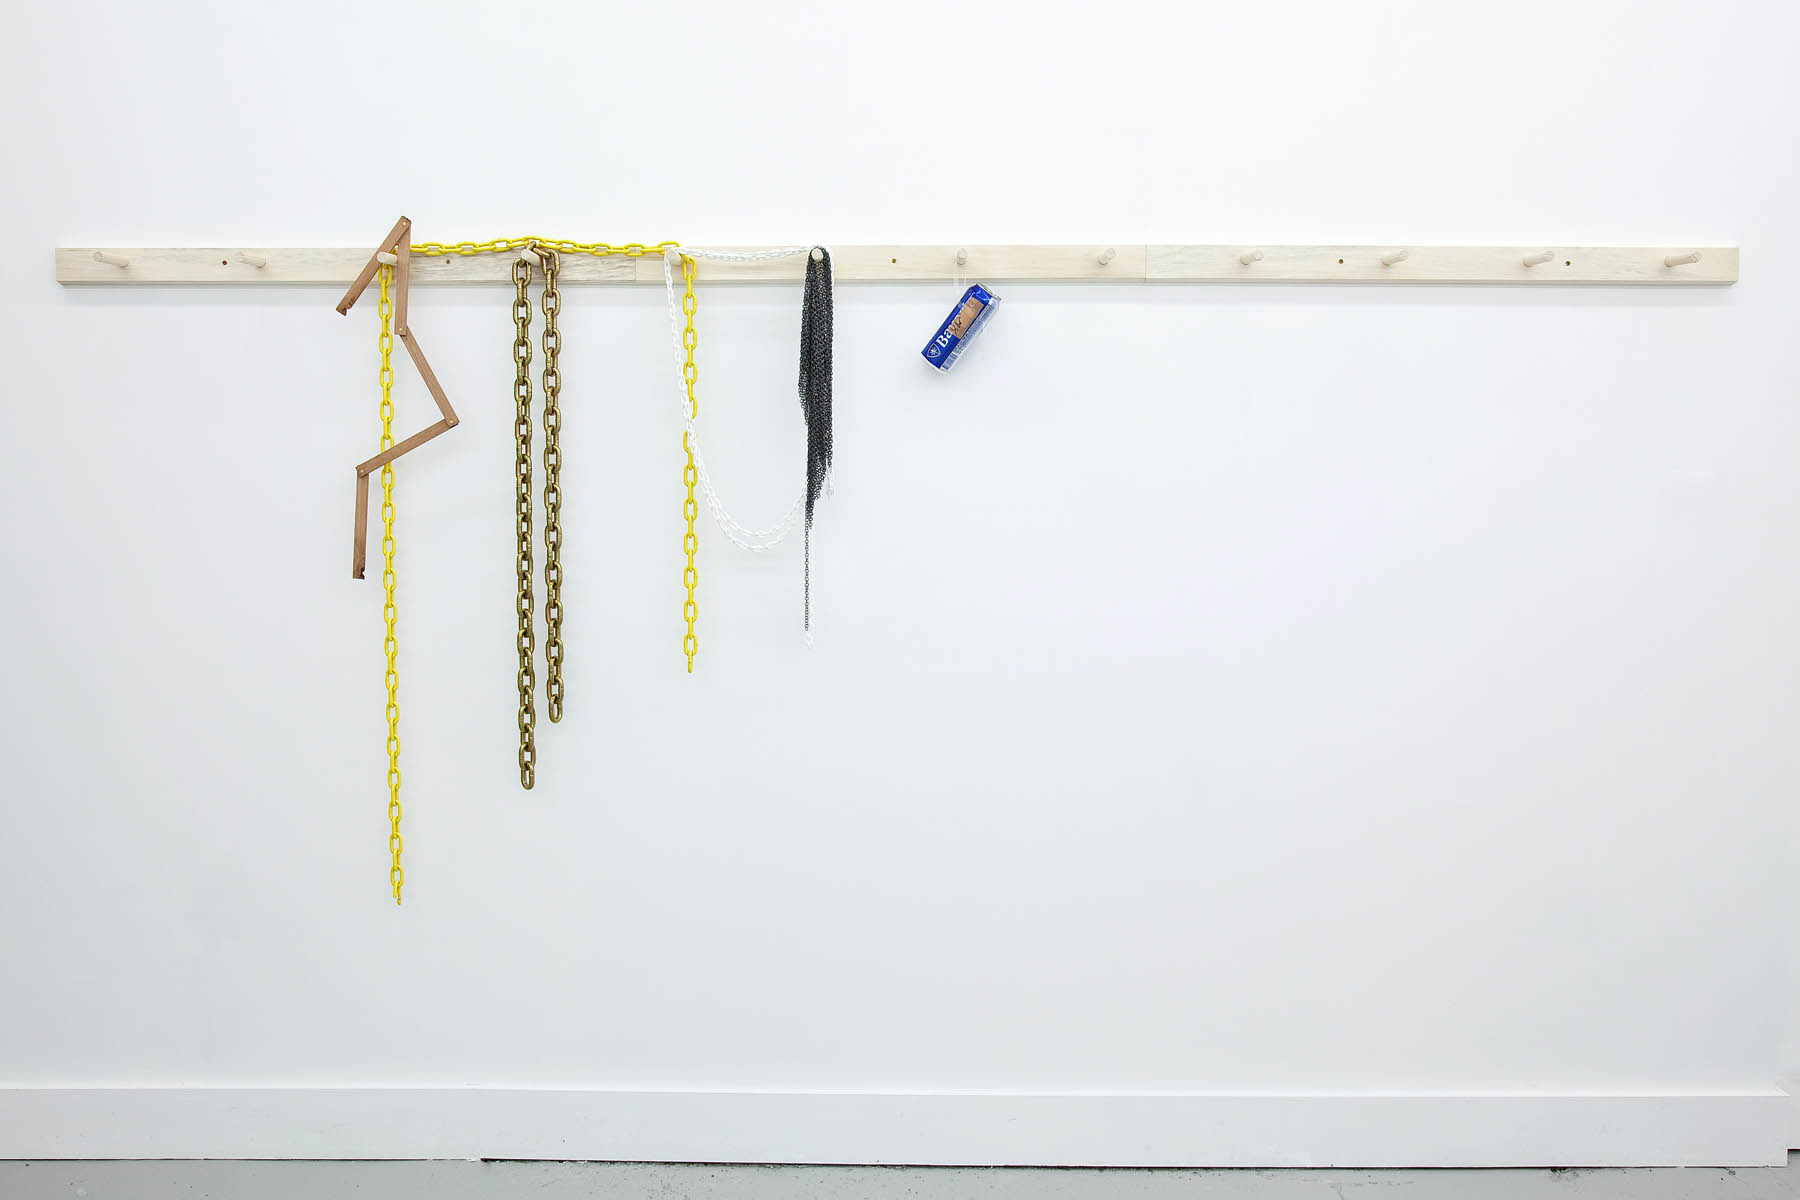 , 2012, Wood peg rail, wooden meter, metal chains, bear can modified, 120 x 366 x 16 cm, , unique artwork, installation view at G Gallery, Toronto